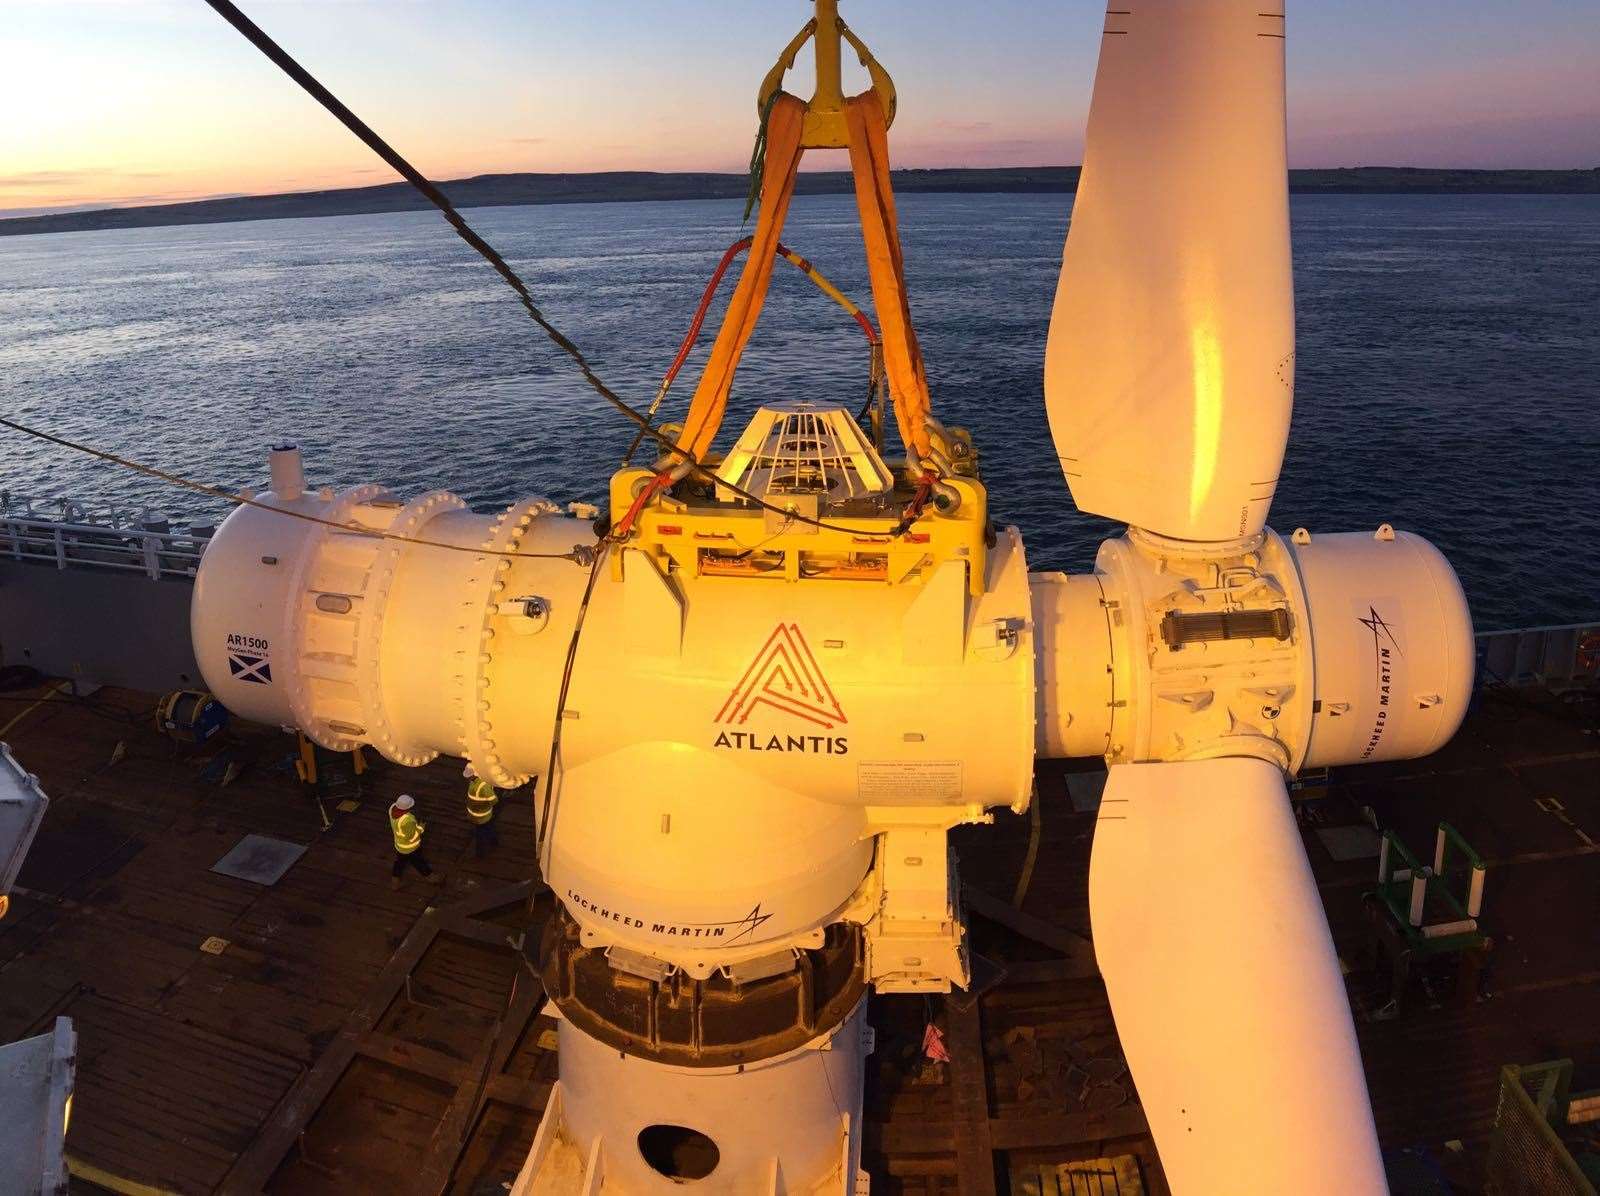 MeyGen achieved a world first last year when it recorded the longest period of uninterrupted electricity generation ever reached.